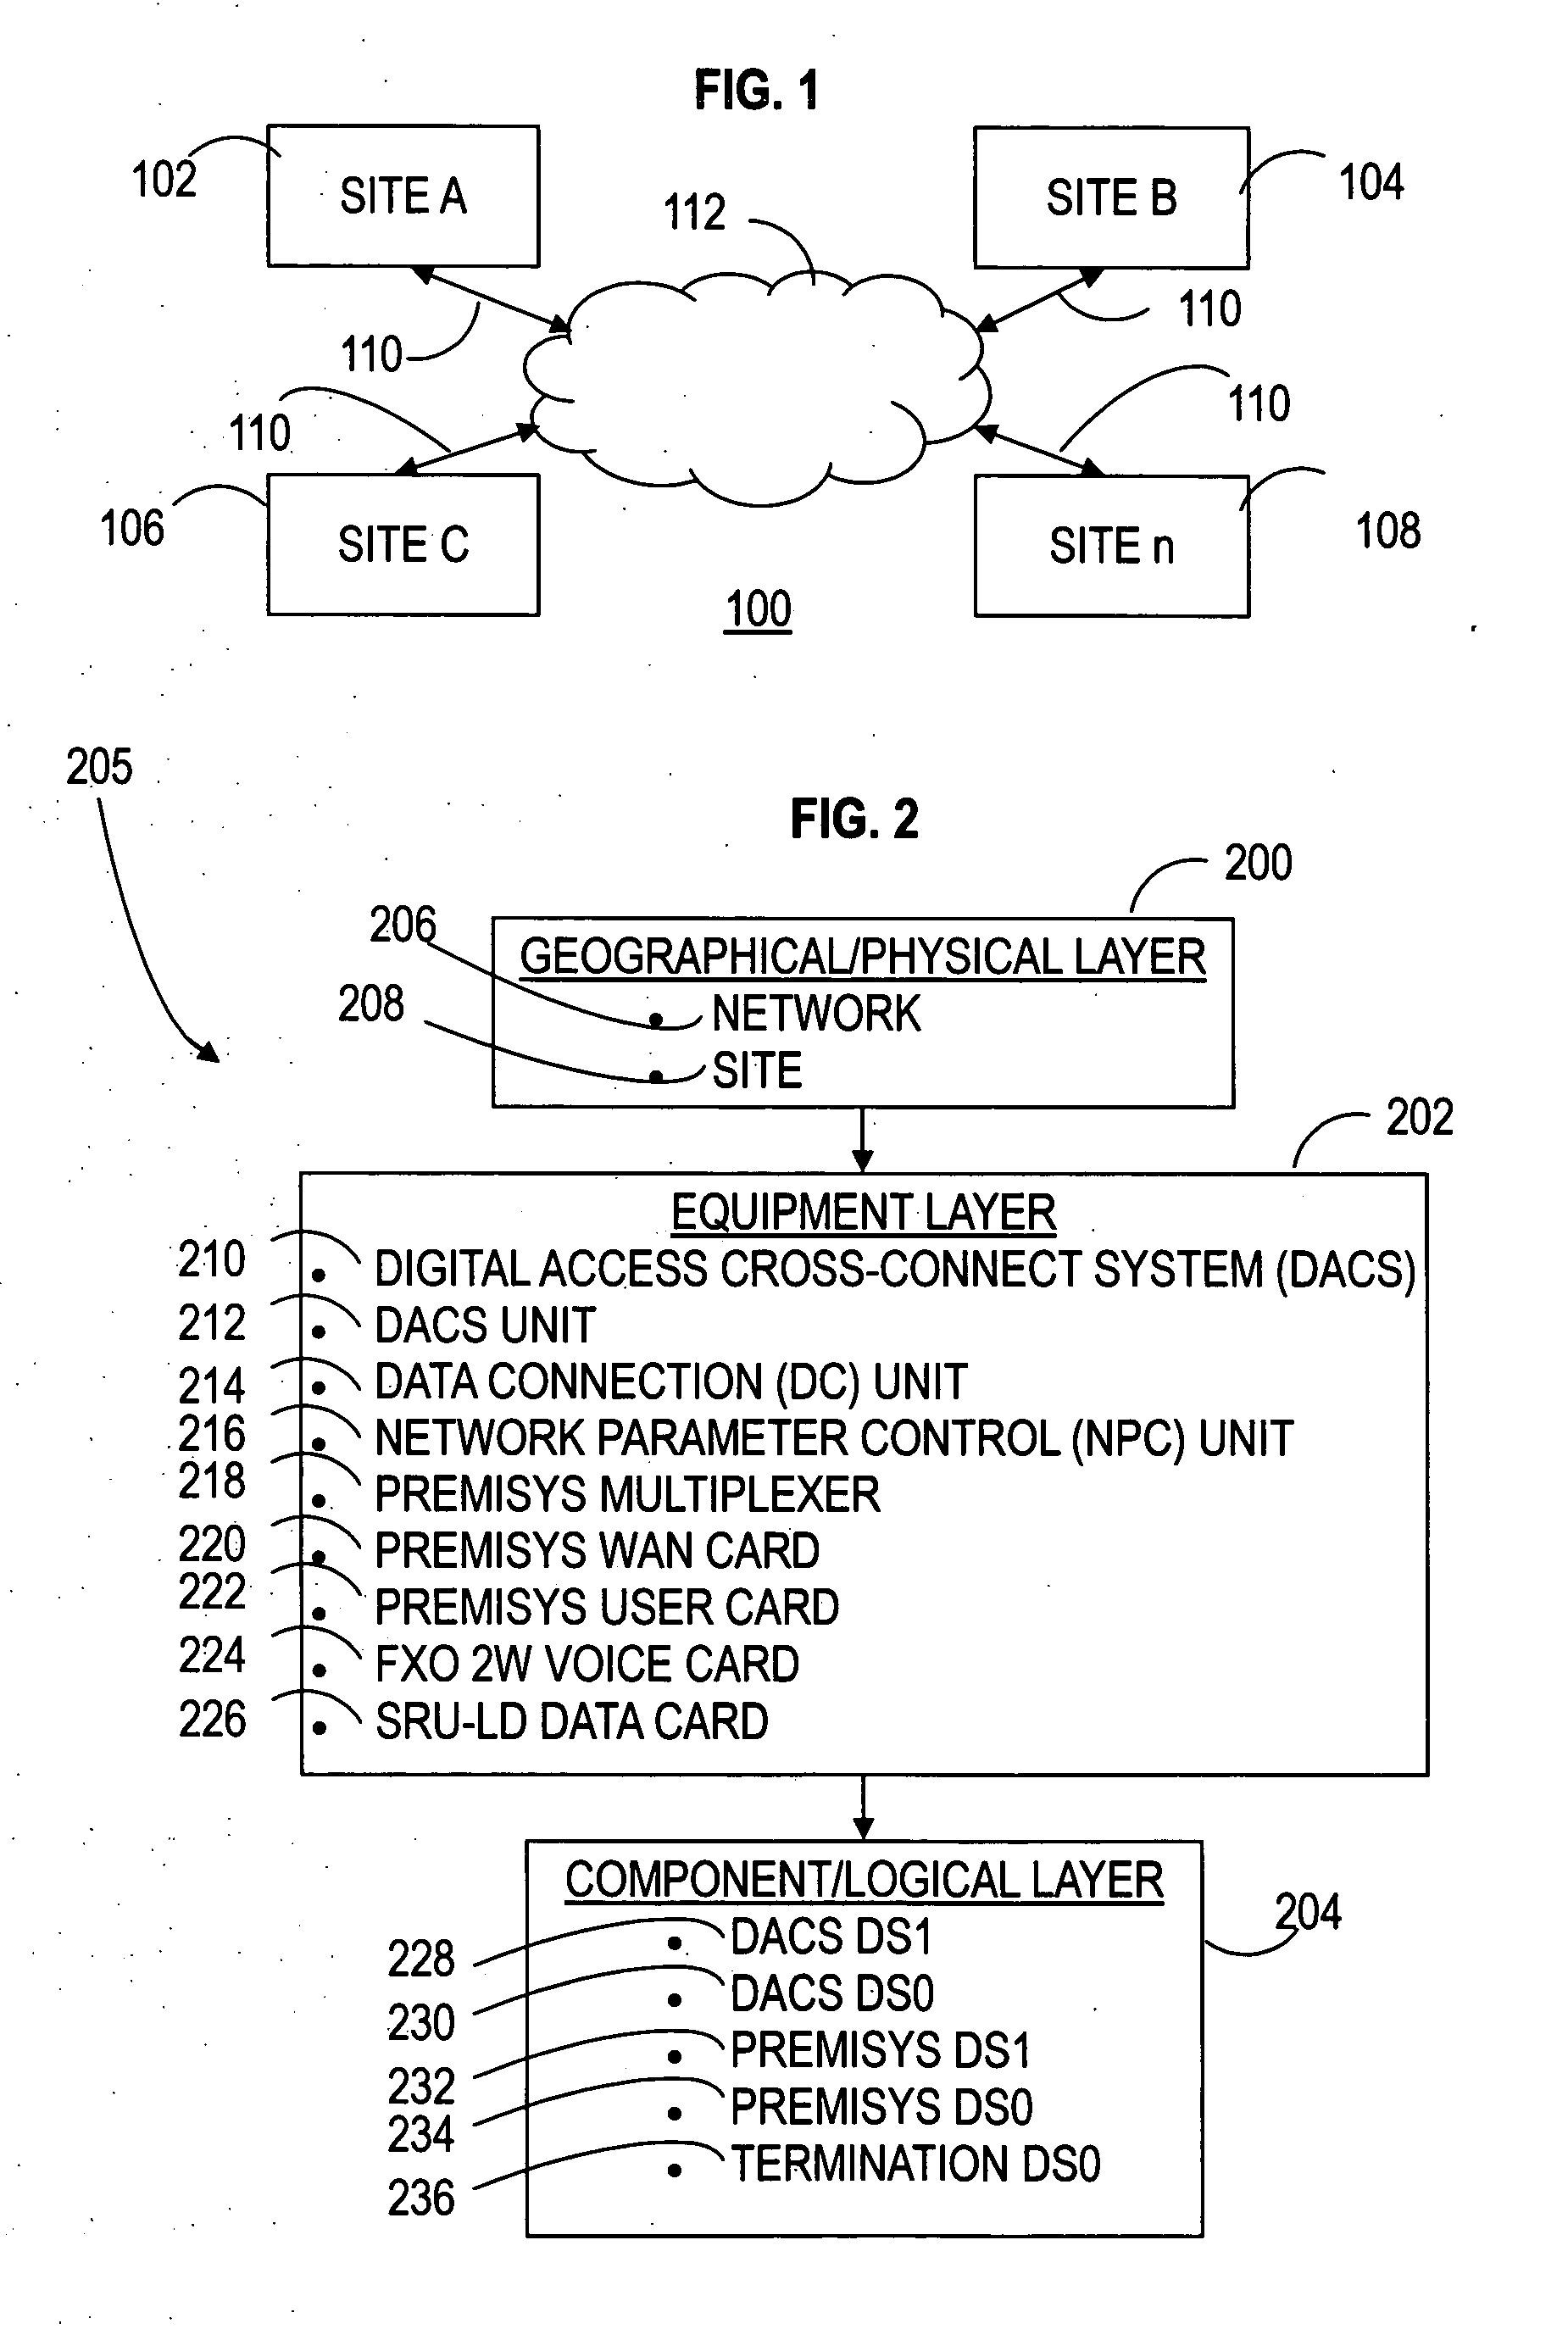 Method for modeling and documenting a network